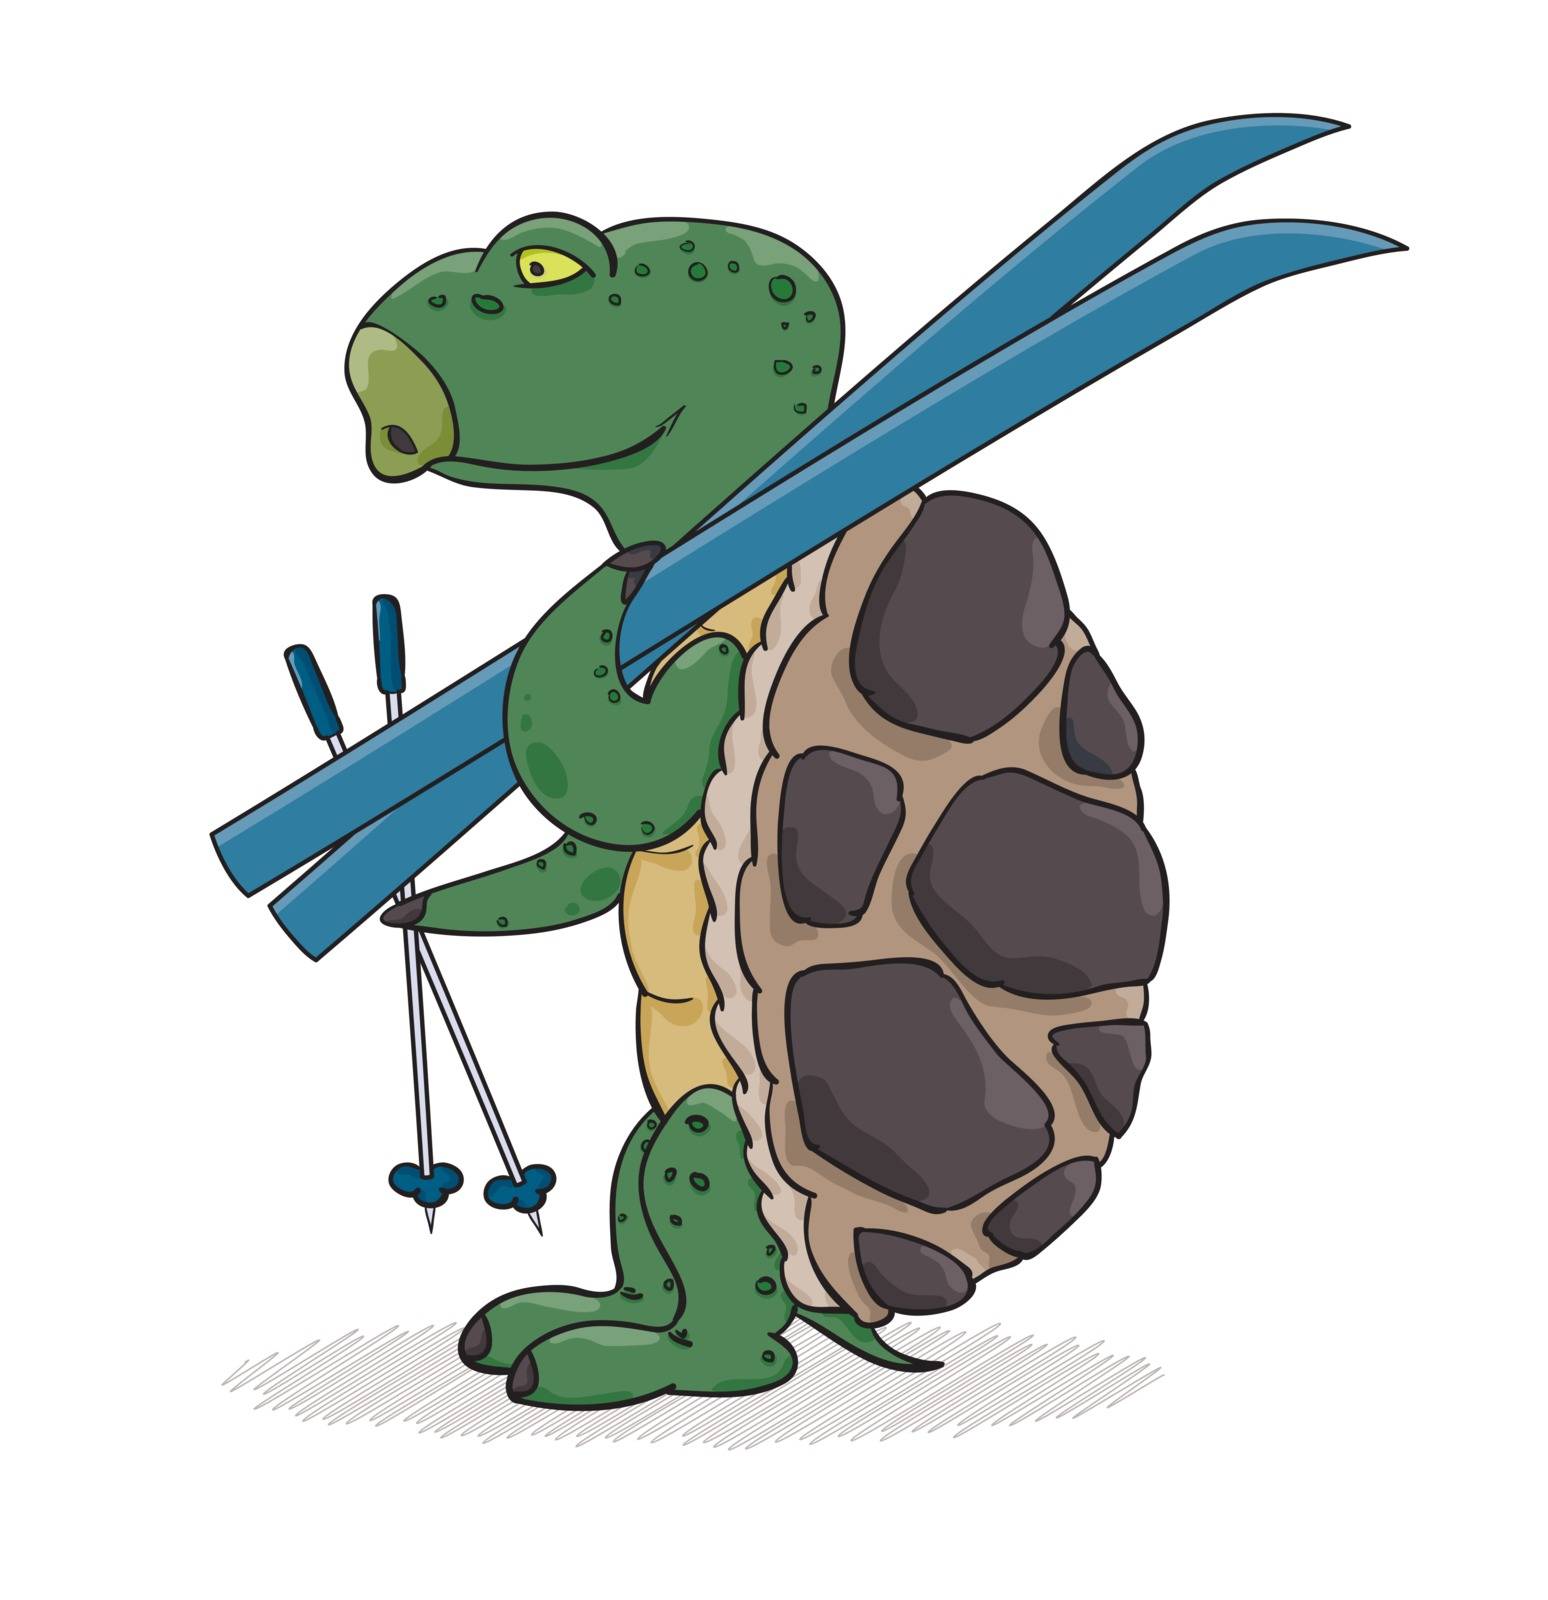 Turtle with blue skis ready for skiing. Cartoon illustration.